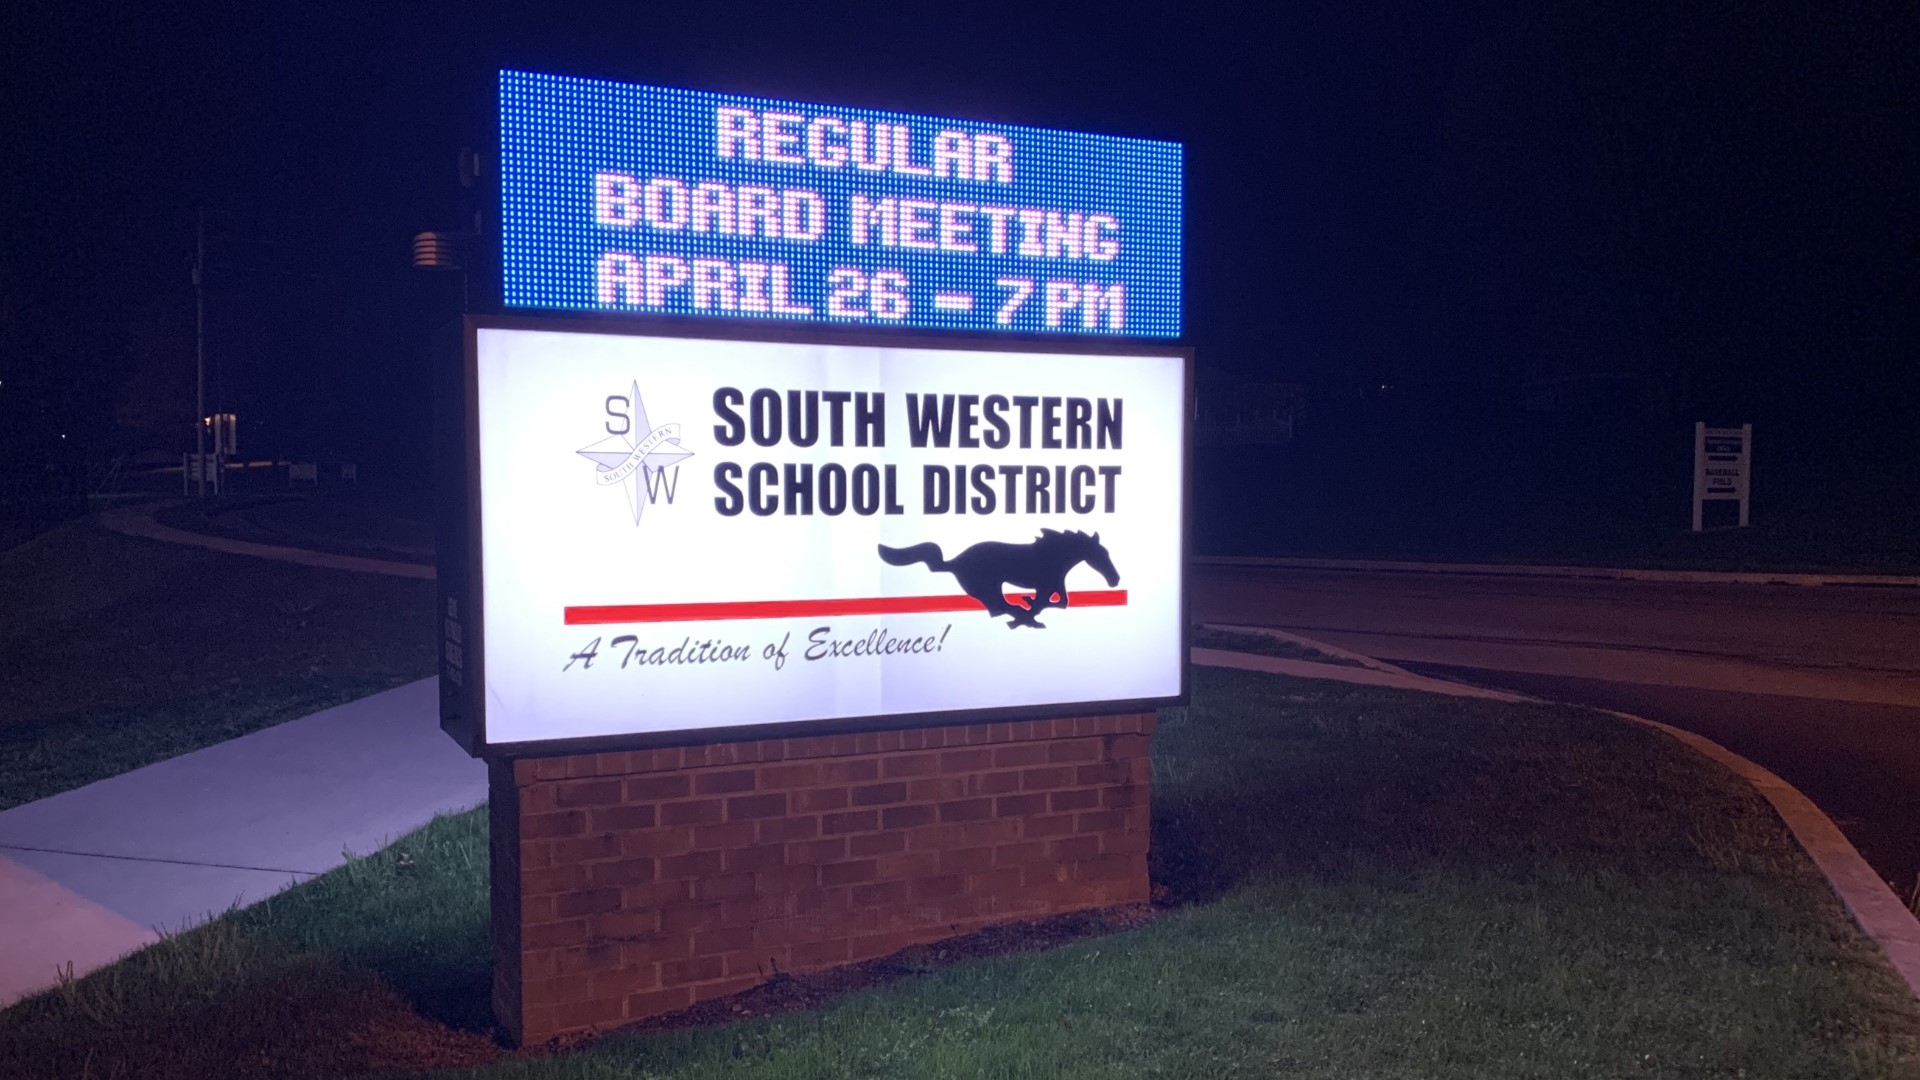 During the discussion among school board members, South Western’s board president suggested the district needed more time to come up with a fair policy.